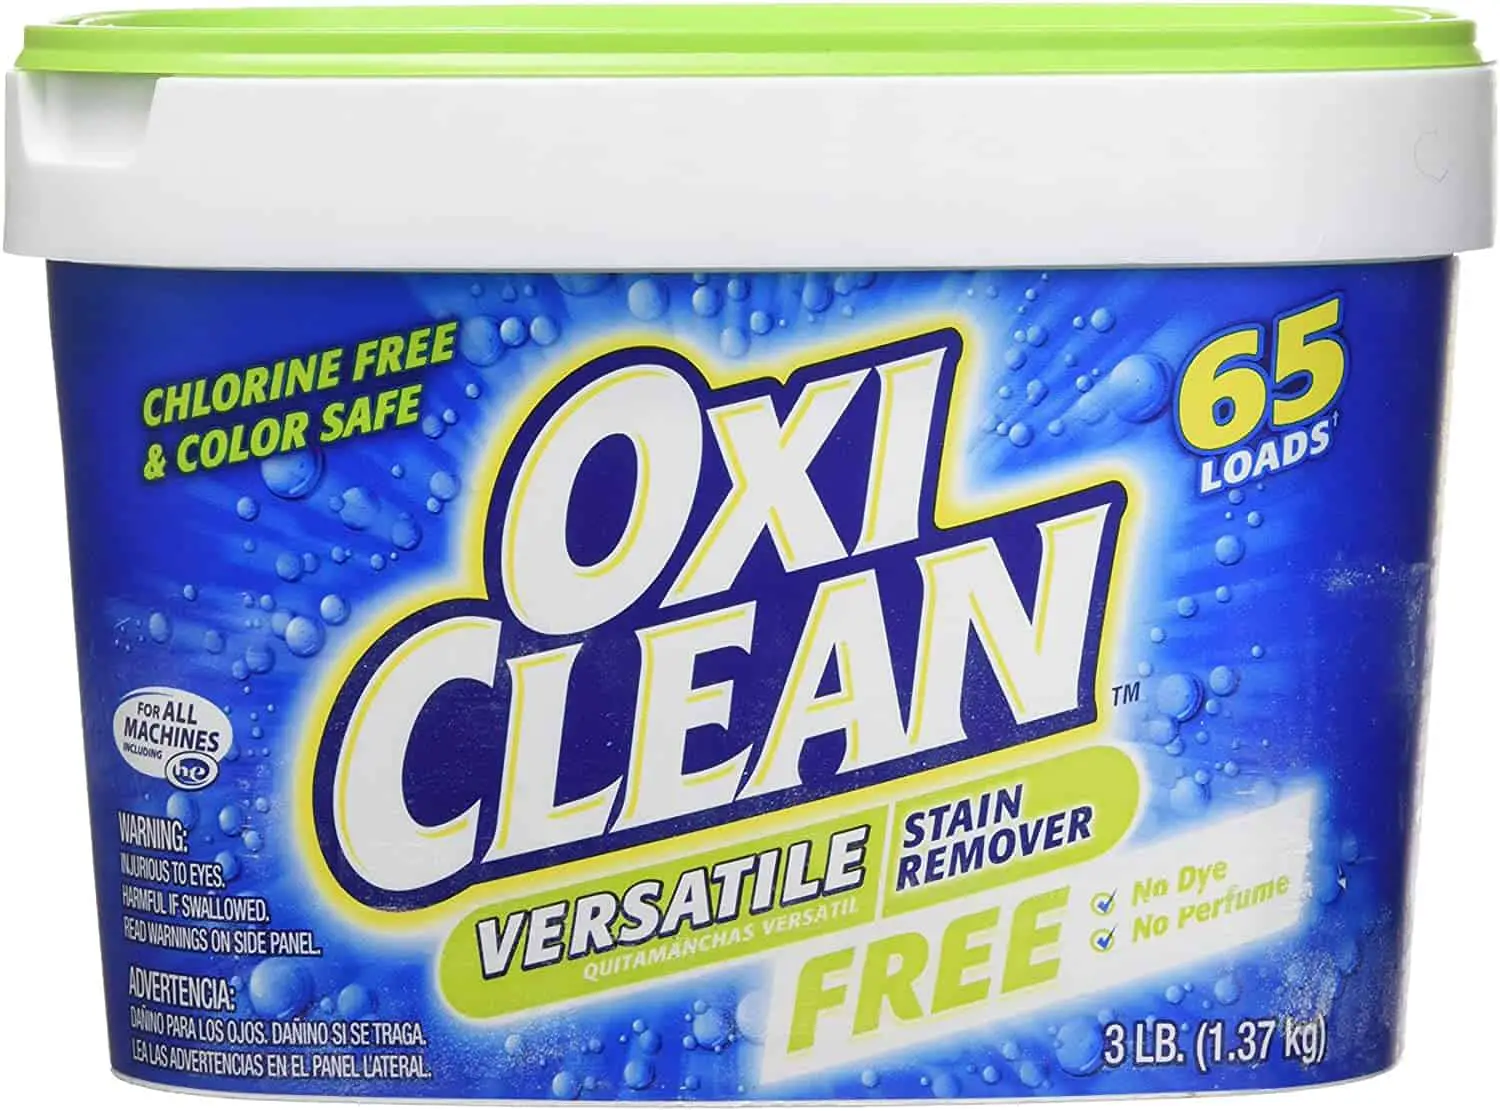 OxiClean Stain remover safety vest